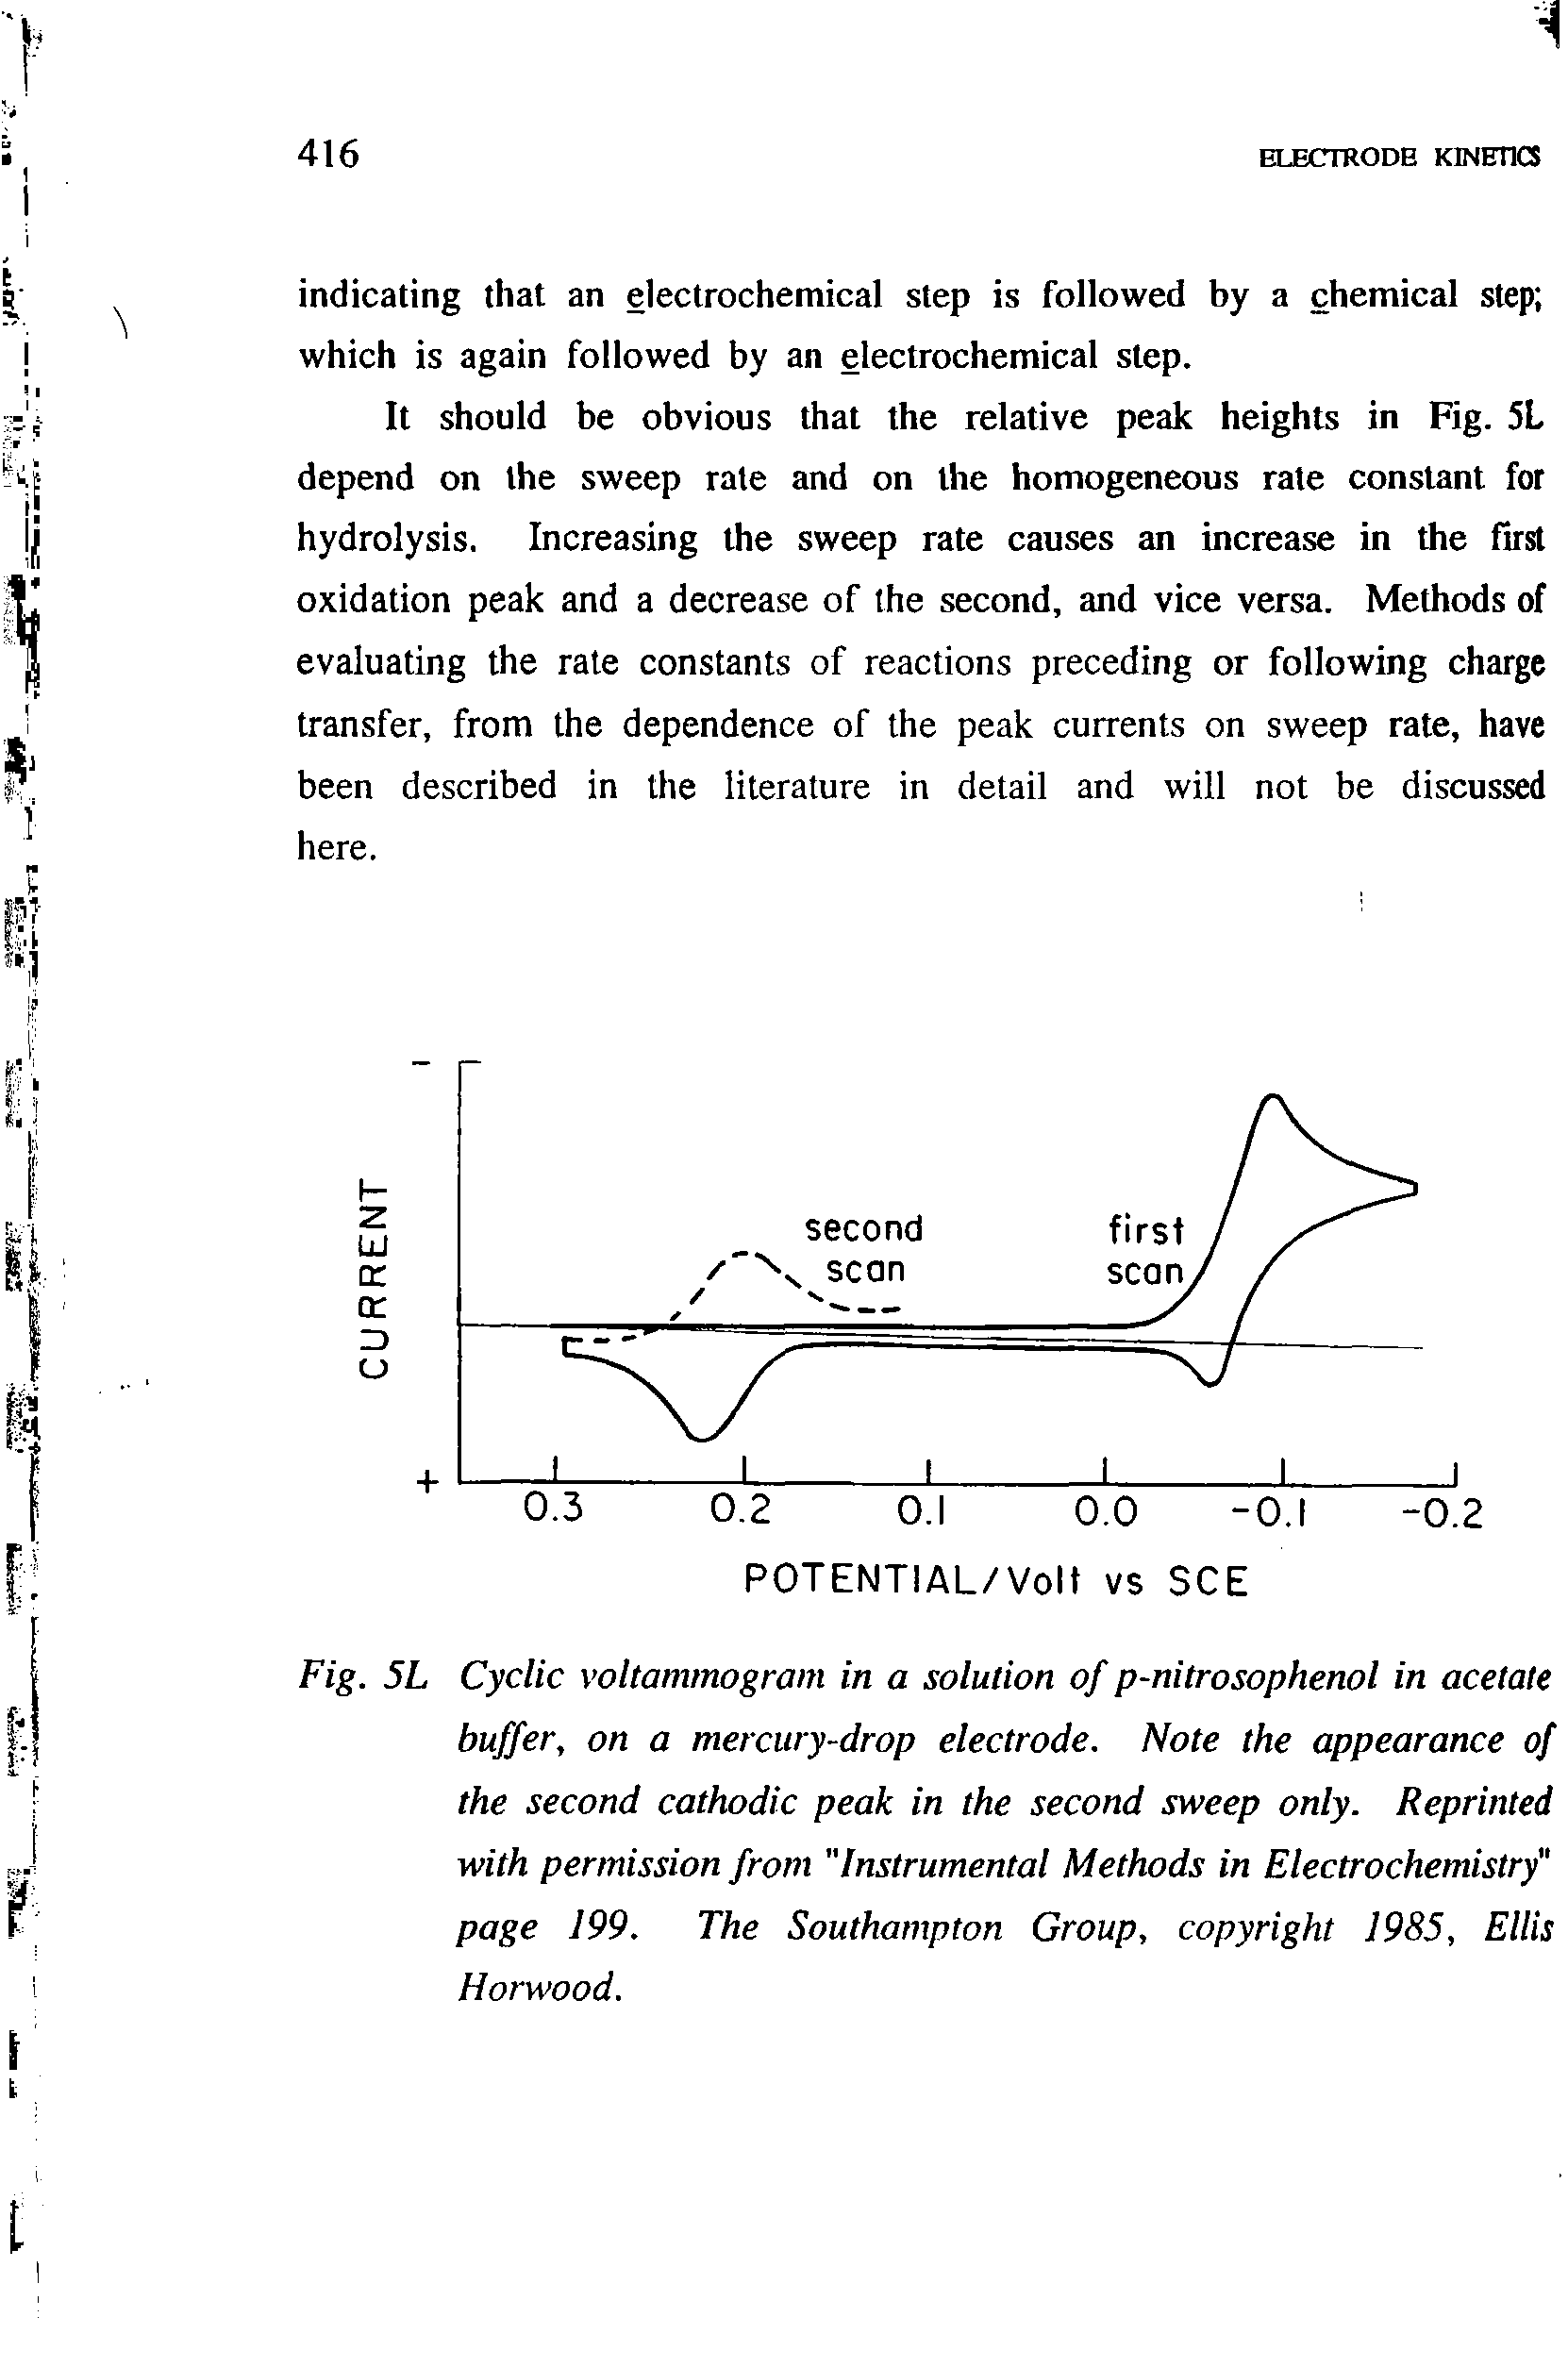 Fig. 5L Cyclic voltammogram in a solution of p-nitrosophenol in acetate buffer, on a mercury-drop electrode. Note the appearance of the second cathodic peak in the second sweep only. Reprinted with permission from "Instrumental Methods in Electrochemistry page 199. The Southampton Group, copyright 1985, Ellis Norwood.